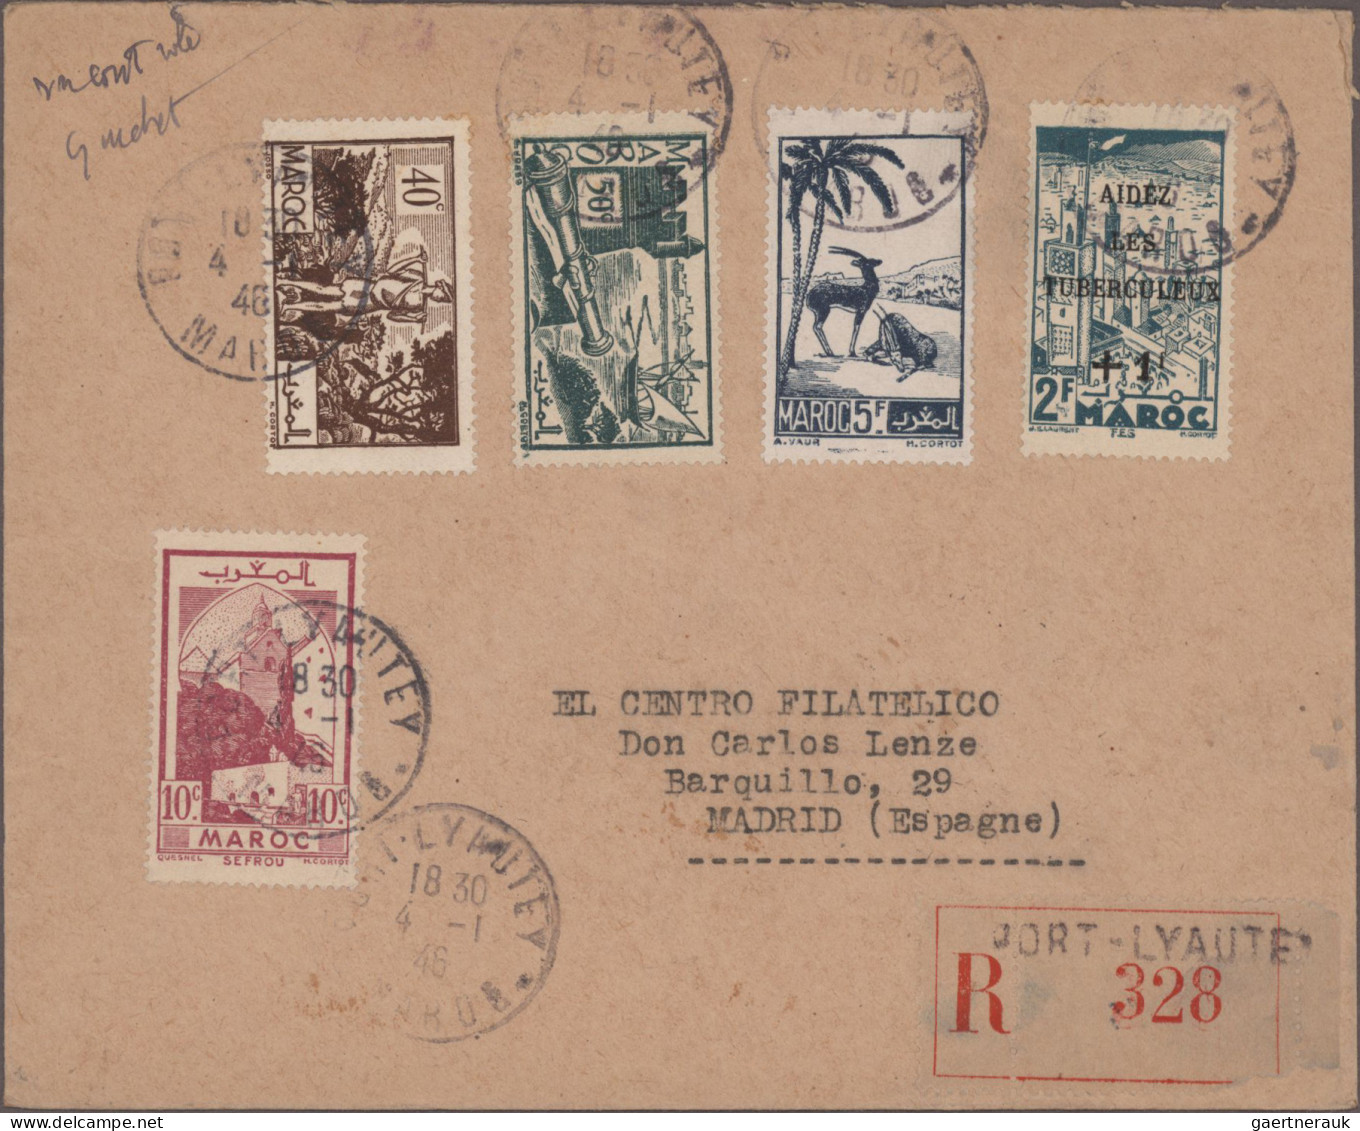 Africa: 1914/2005, balance of apprx. 850 covers/cards with strength in Nigeria a